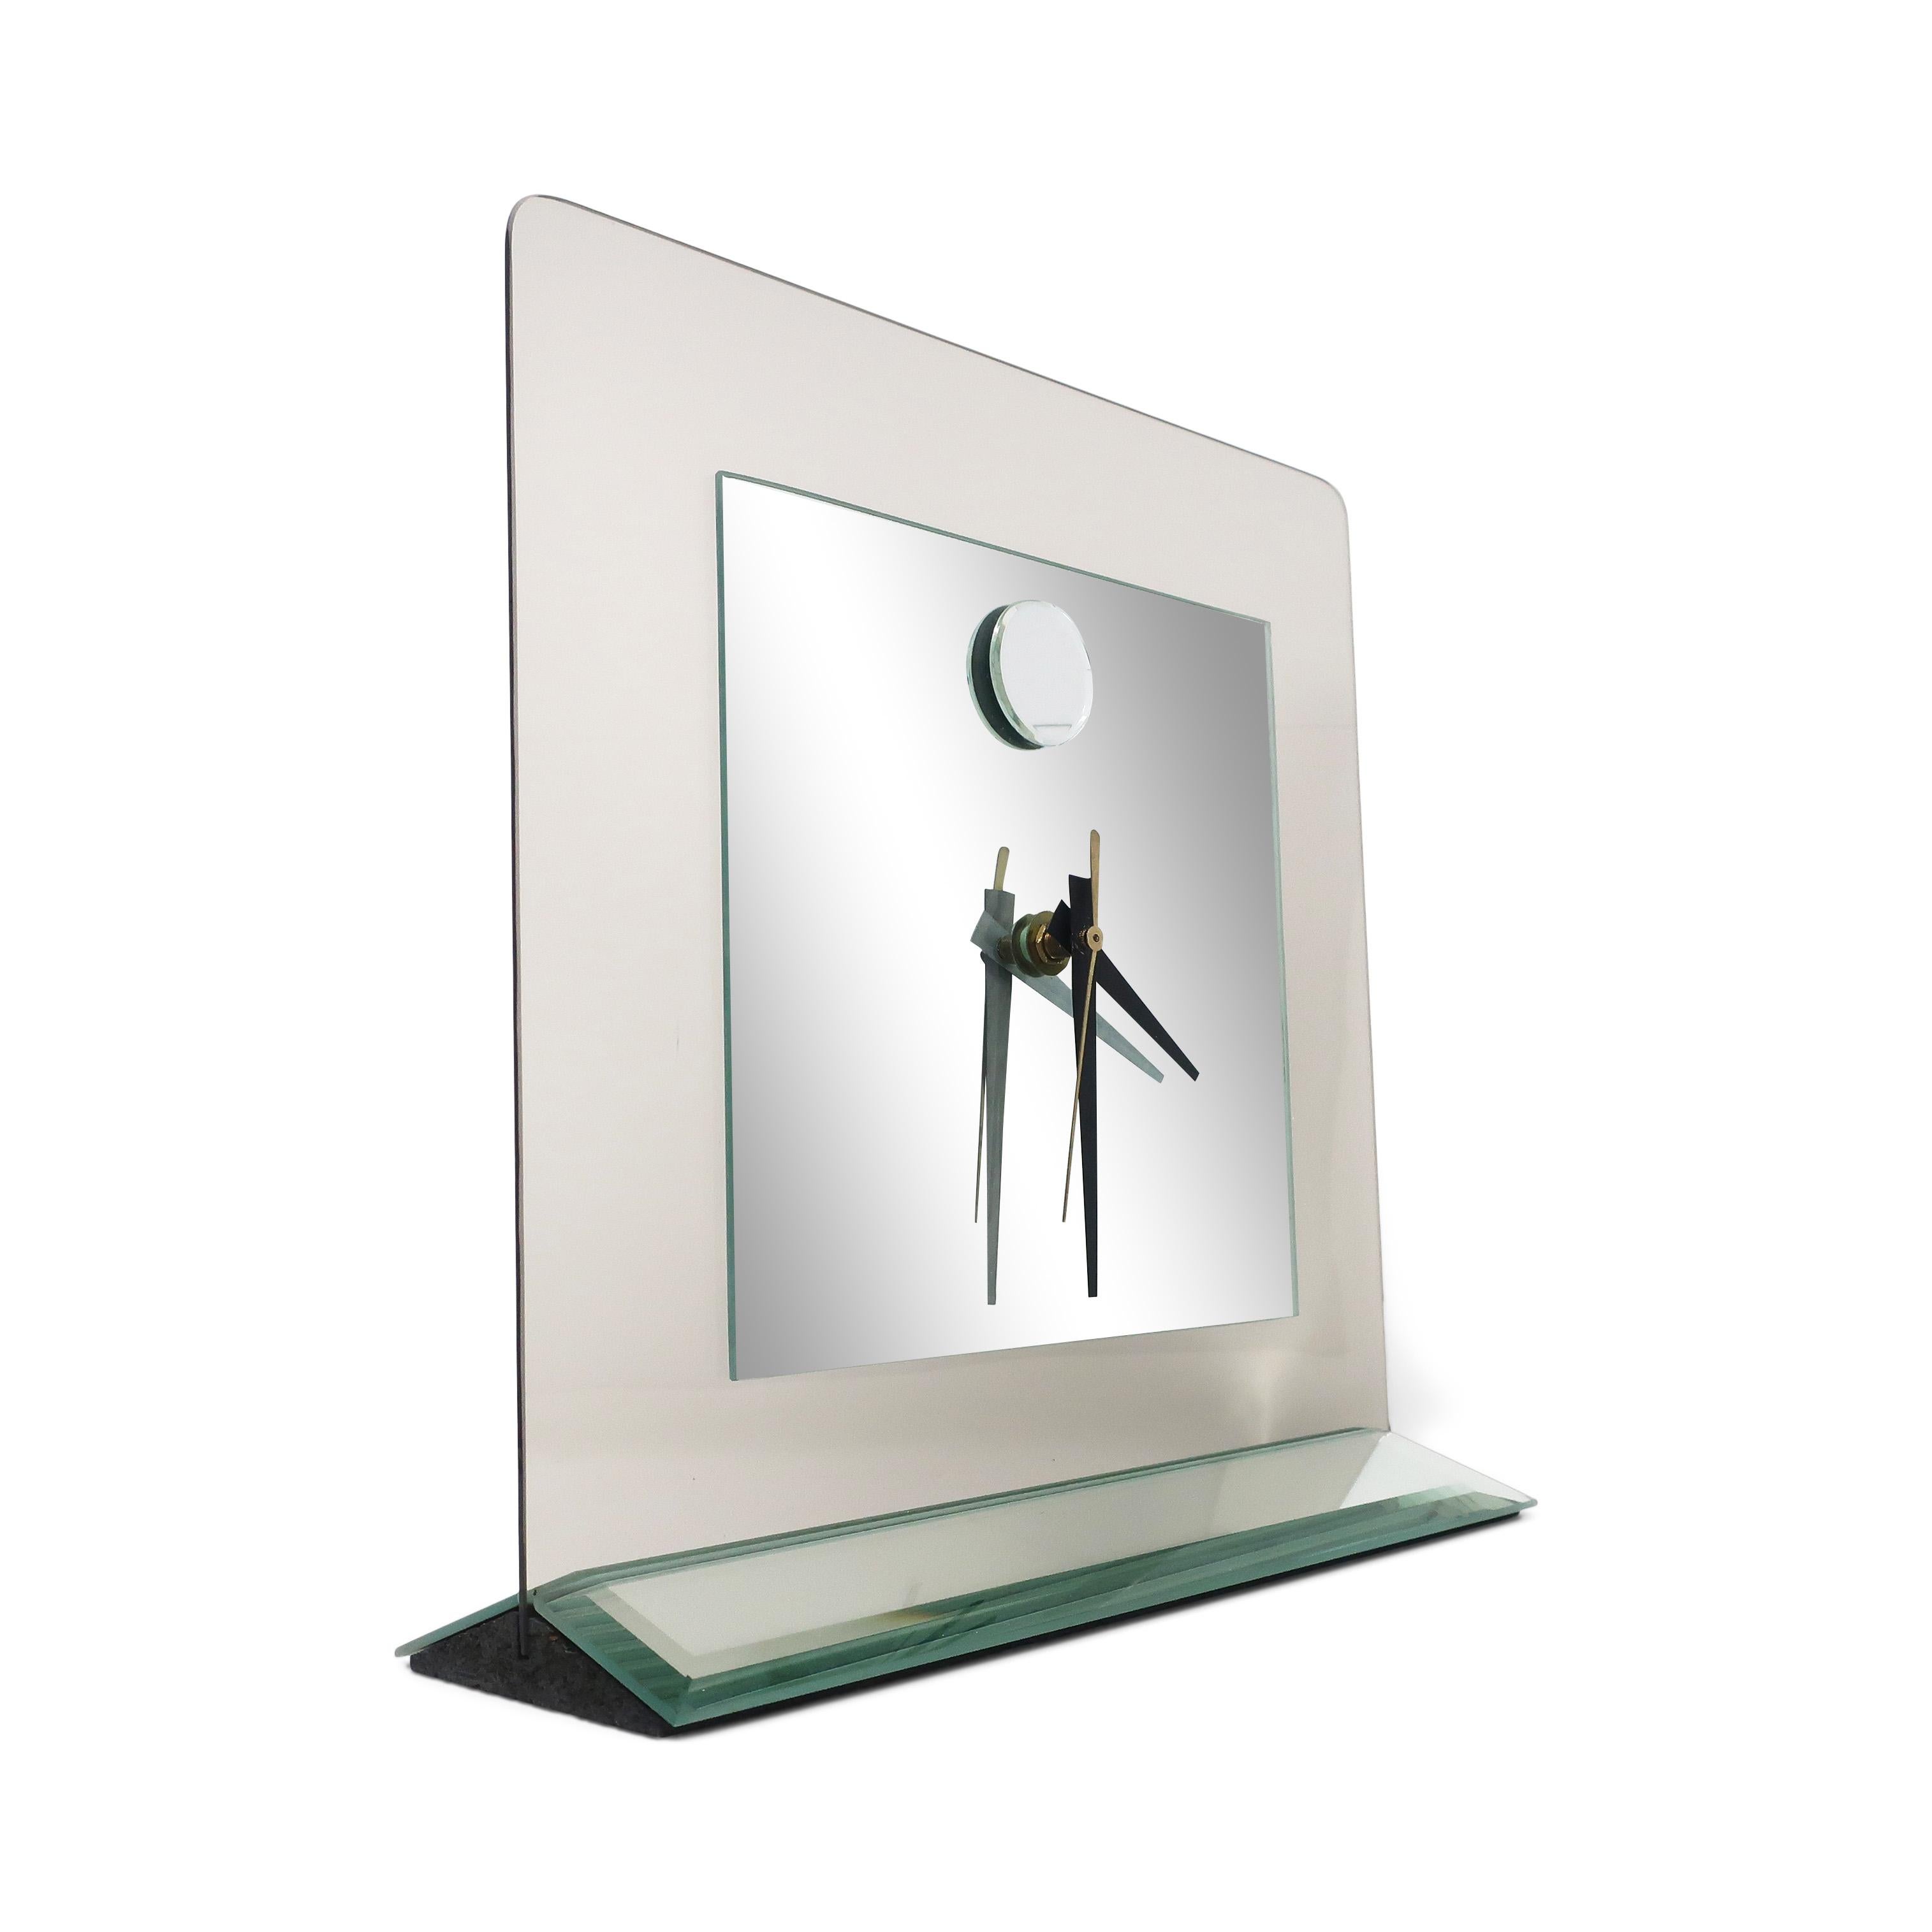 A stunning postmodern smoked glass and mirror table or mantle clock. Triangular mirrored base with beveled edges and a mirrored face with a smoked glass border featuring rounded edges. The design includes a round piece of mirror at 12 o’clock.

In